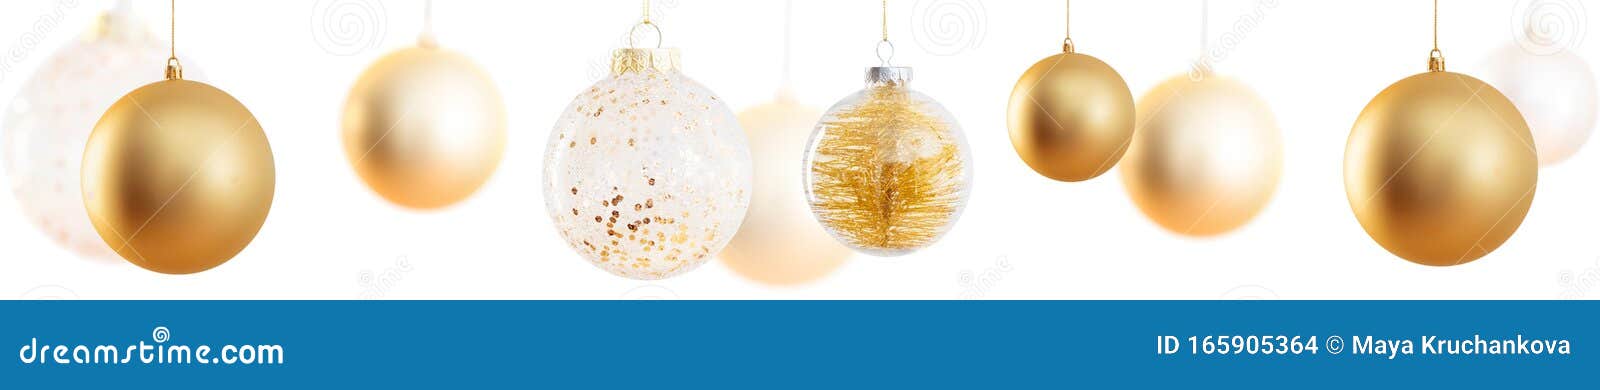 Banner with Christmas Balls Isolated on White Background Stock Photo ...